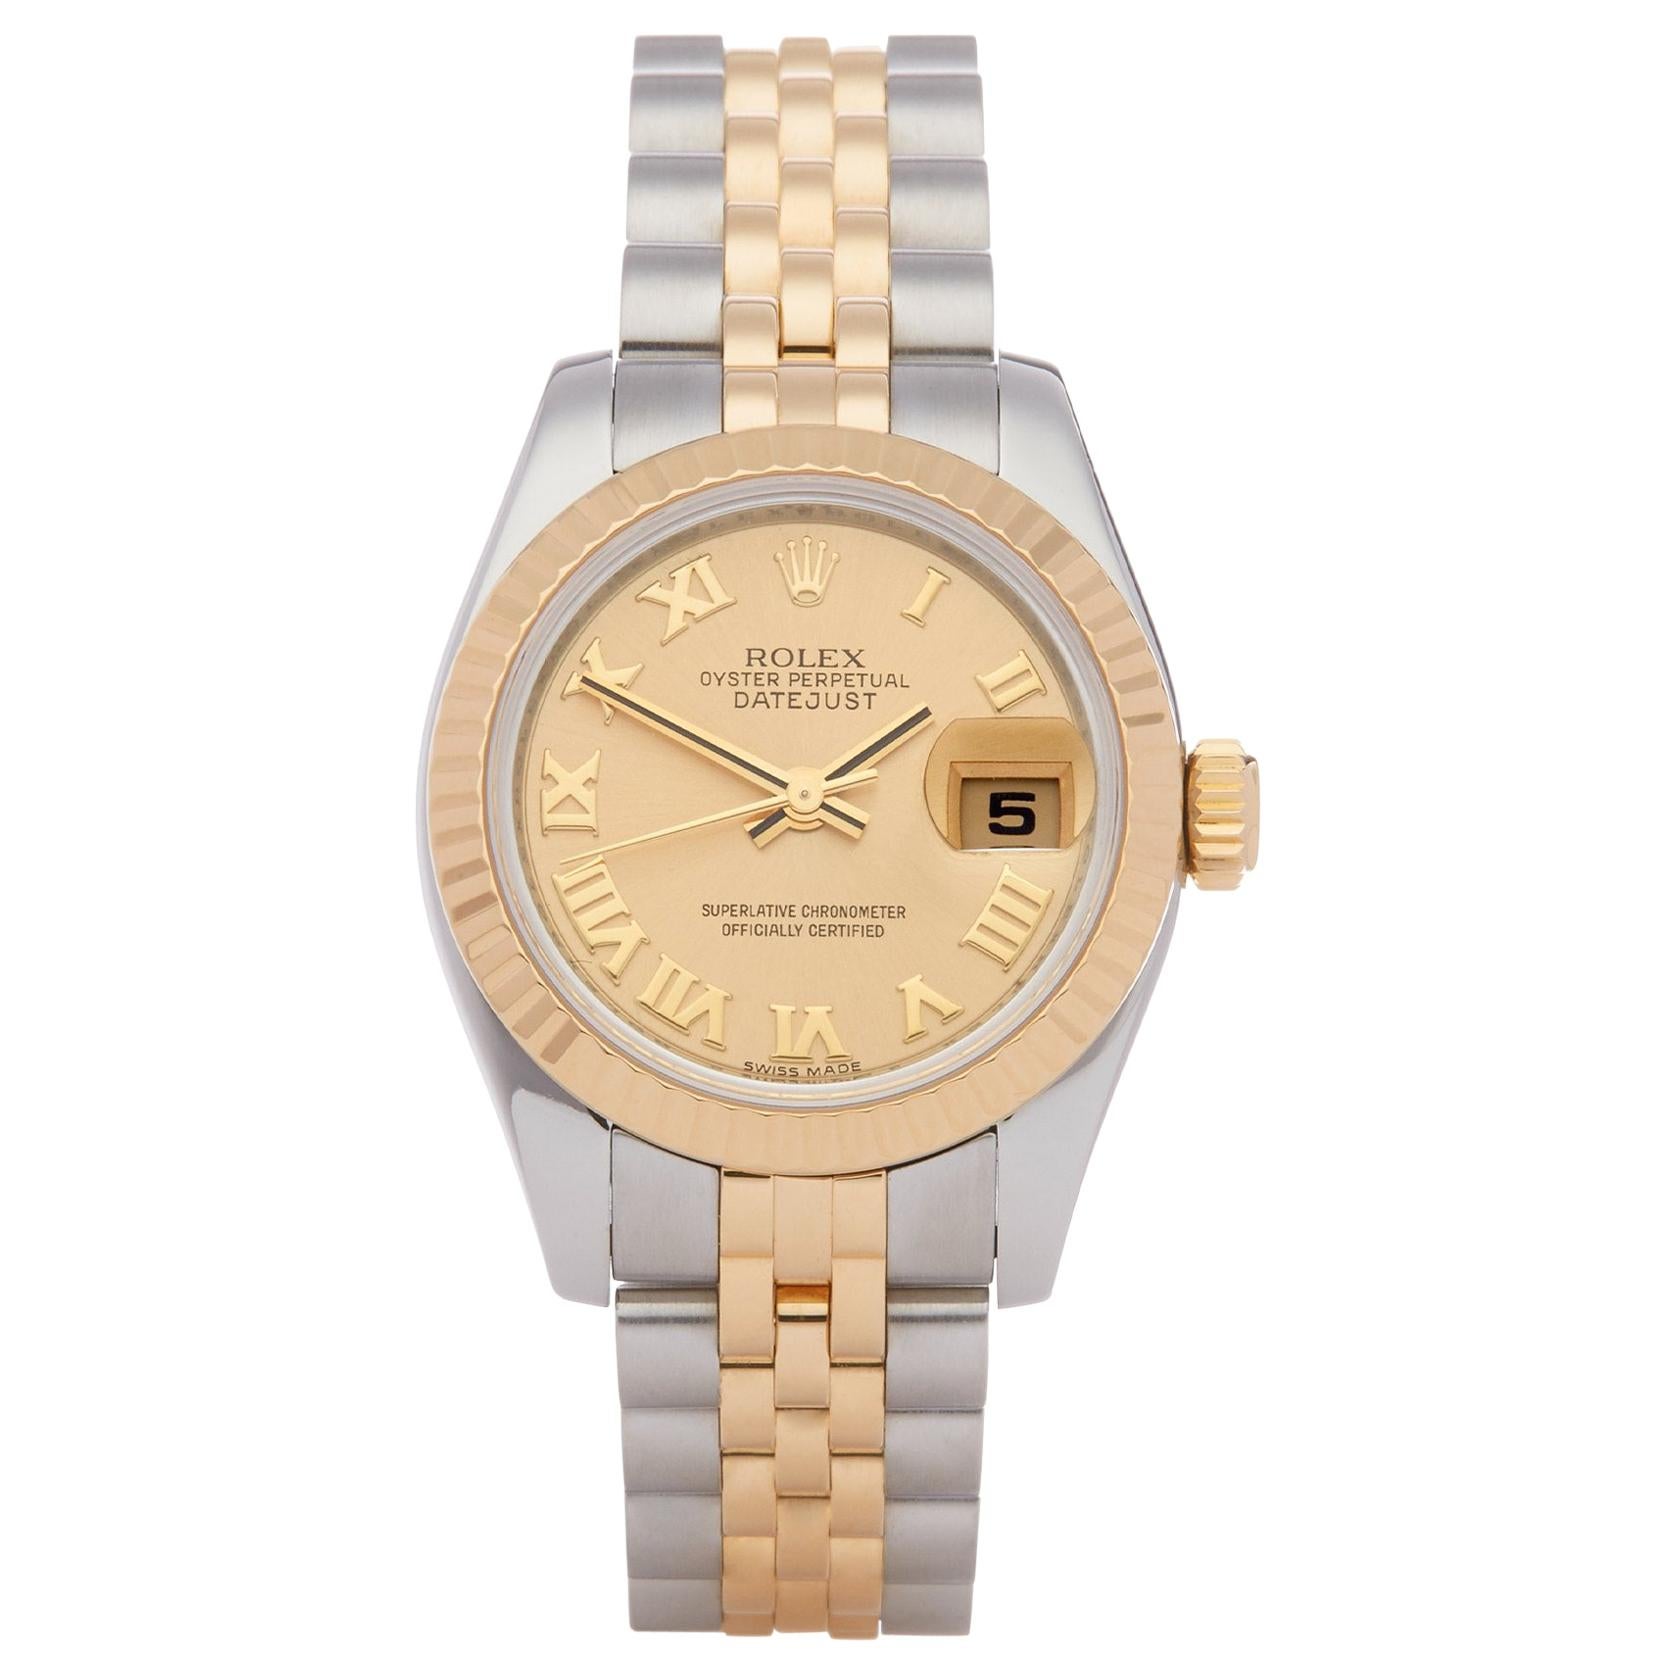 Rolex Datejust 26 179173 Ladies Stainless Steel and Yellow Gold Watch